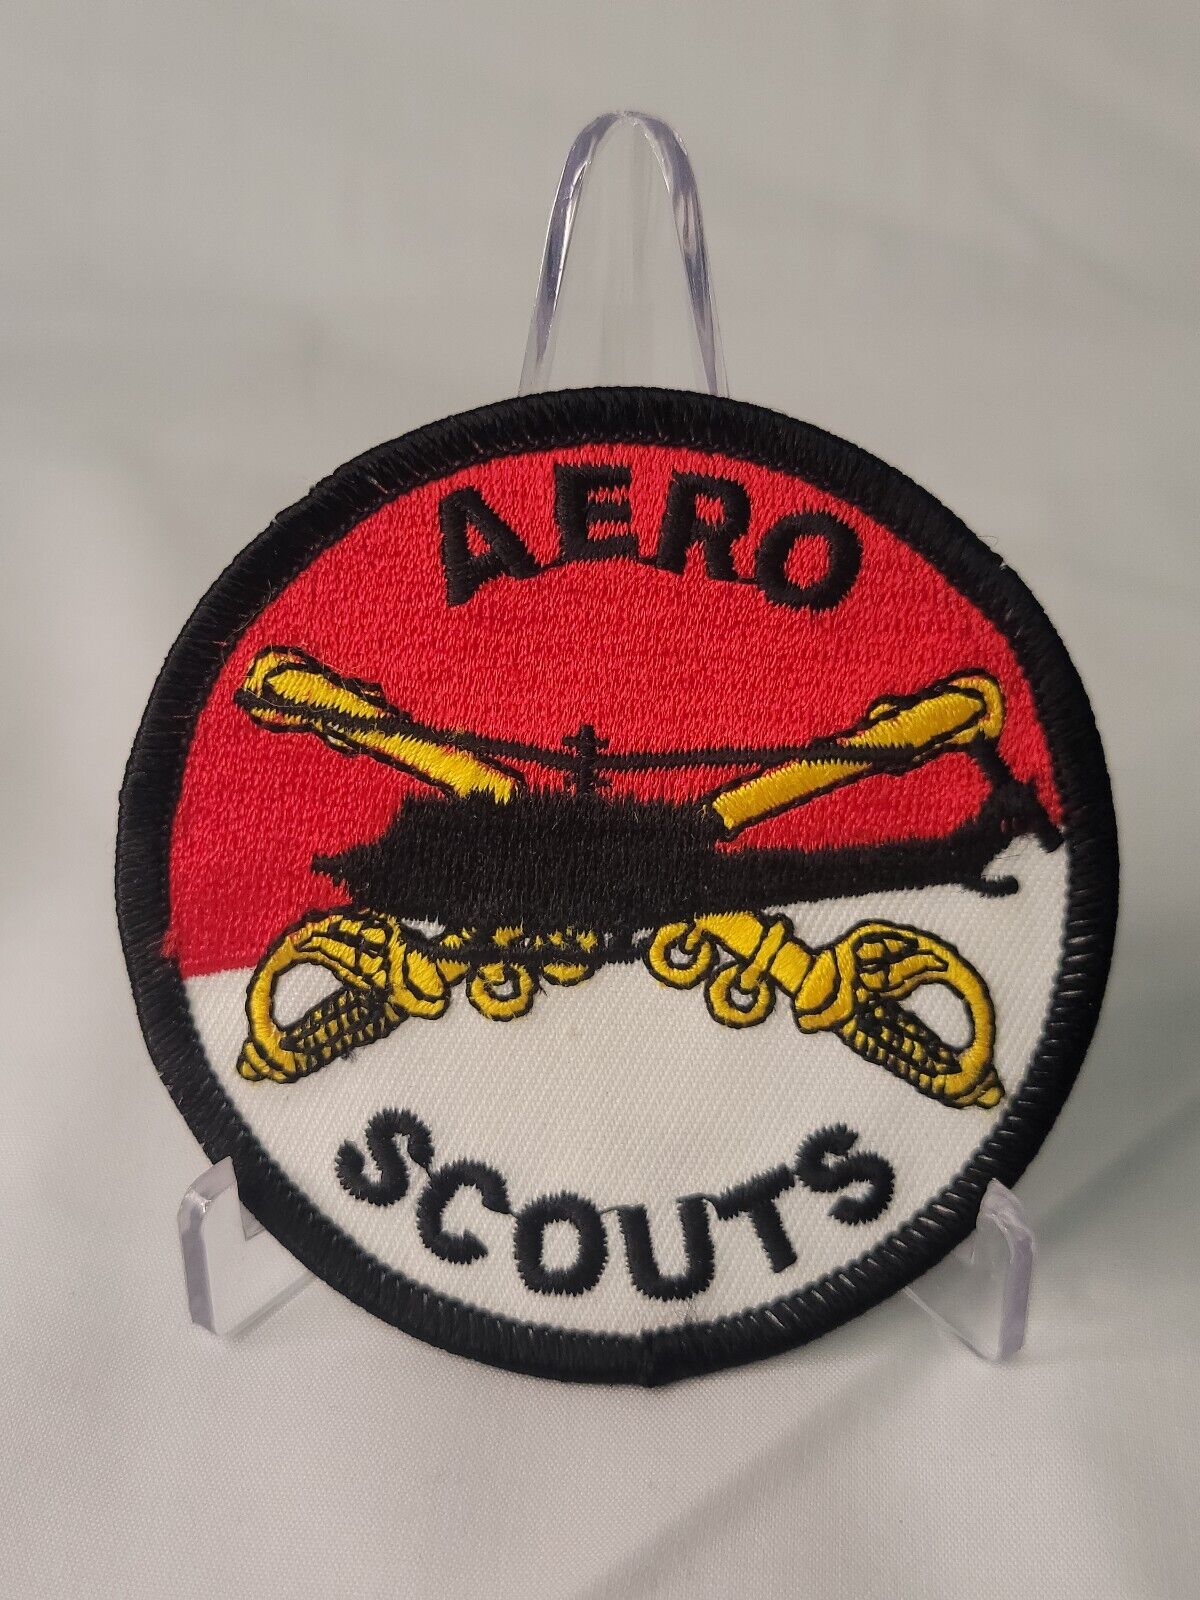 Aero Scouts US Army 1st Squadron 9th Cavarly Regiment Patch